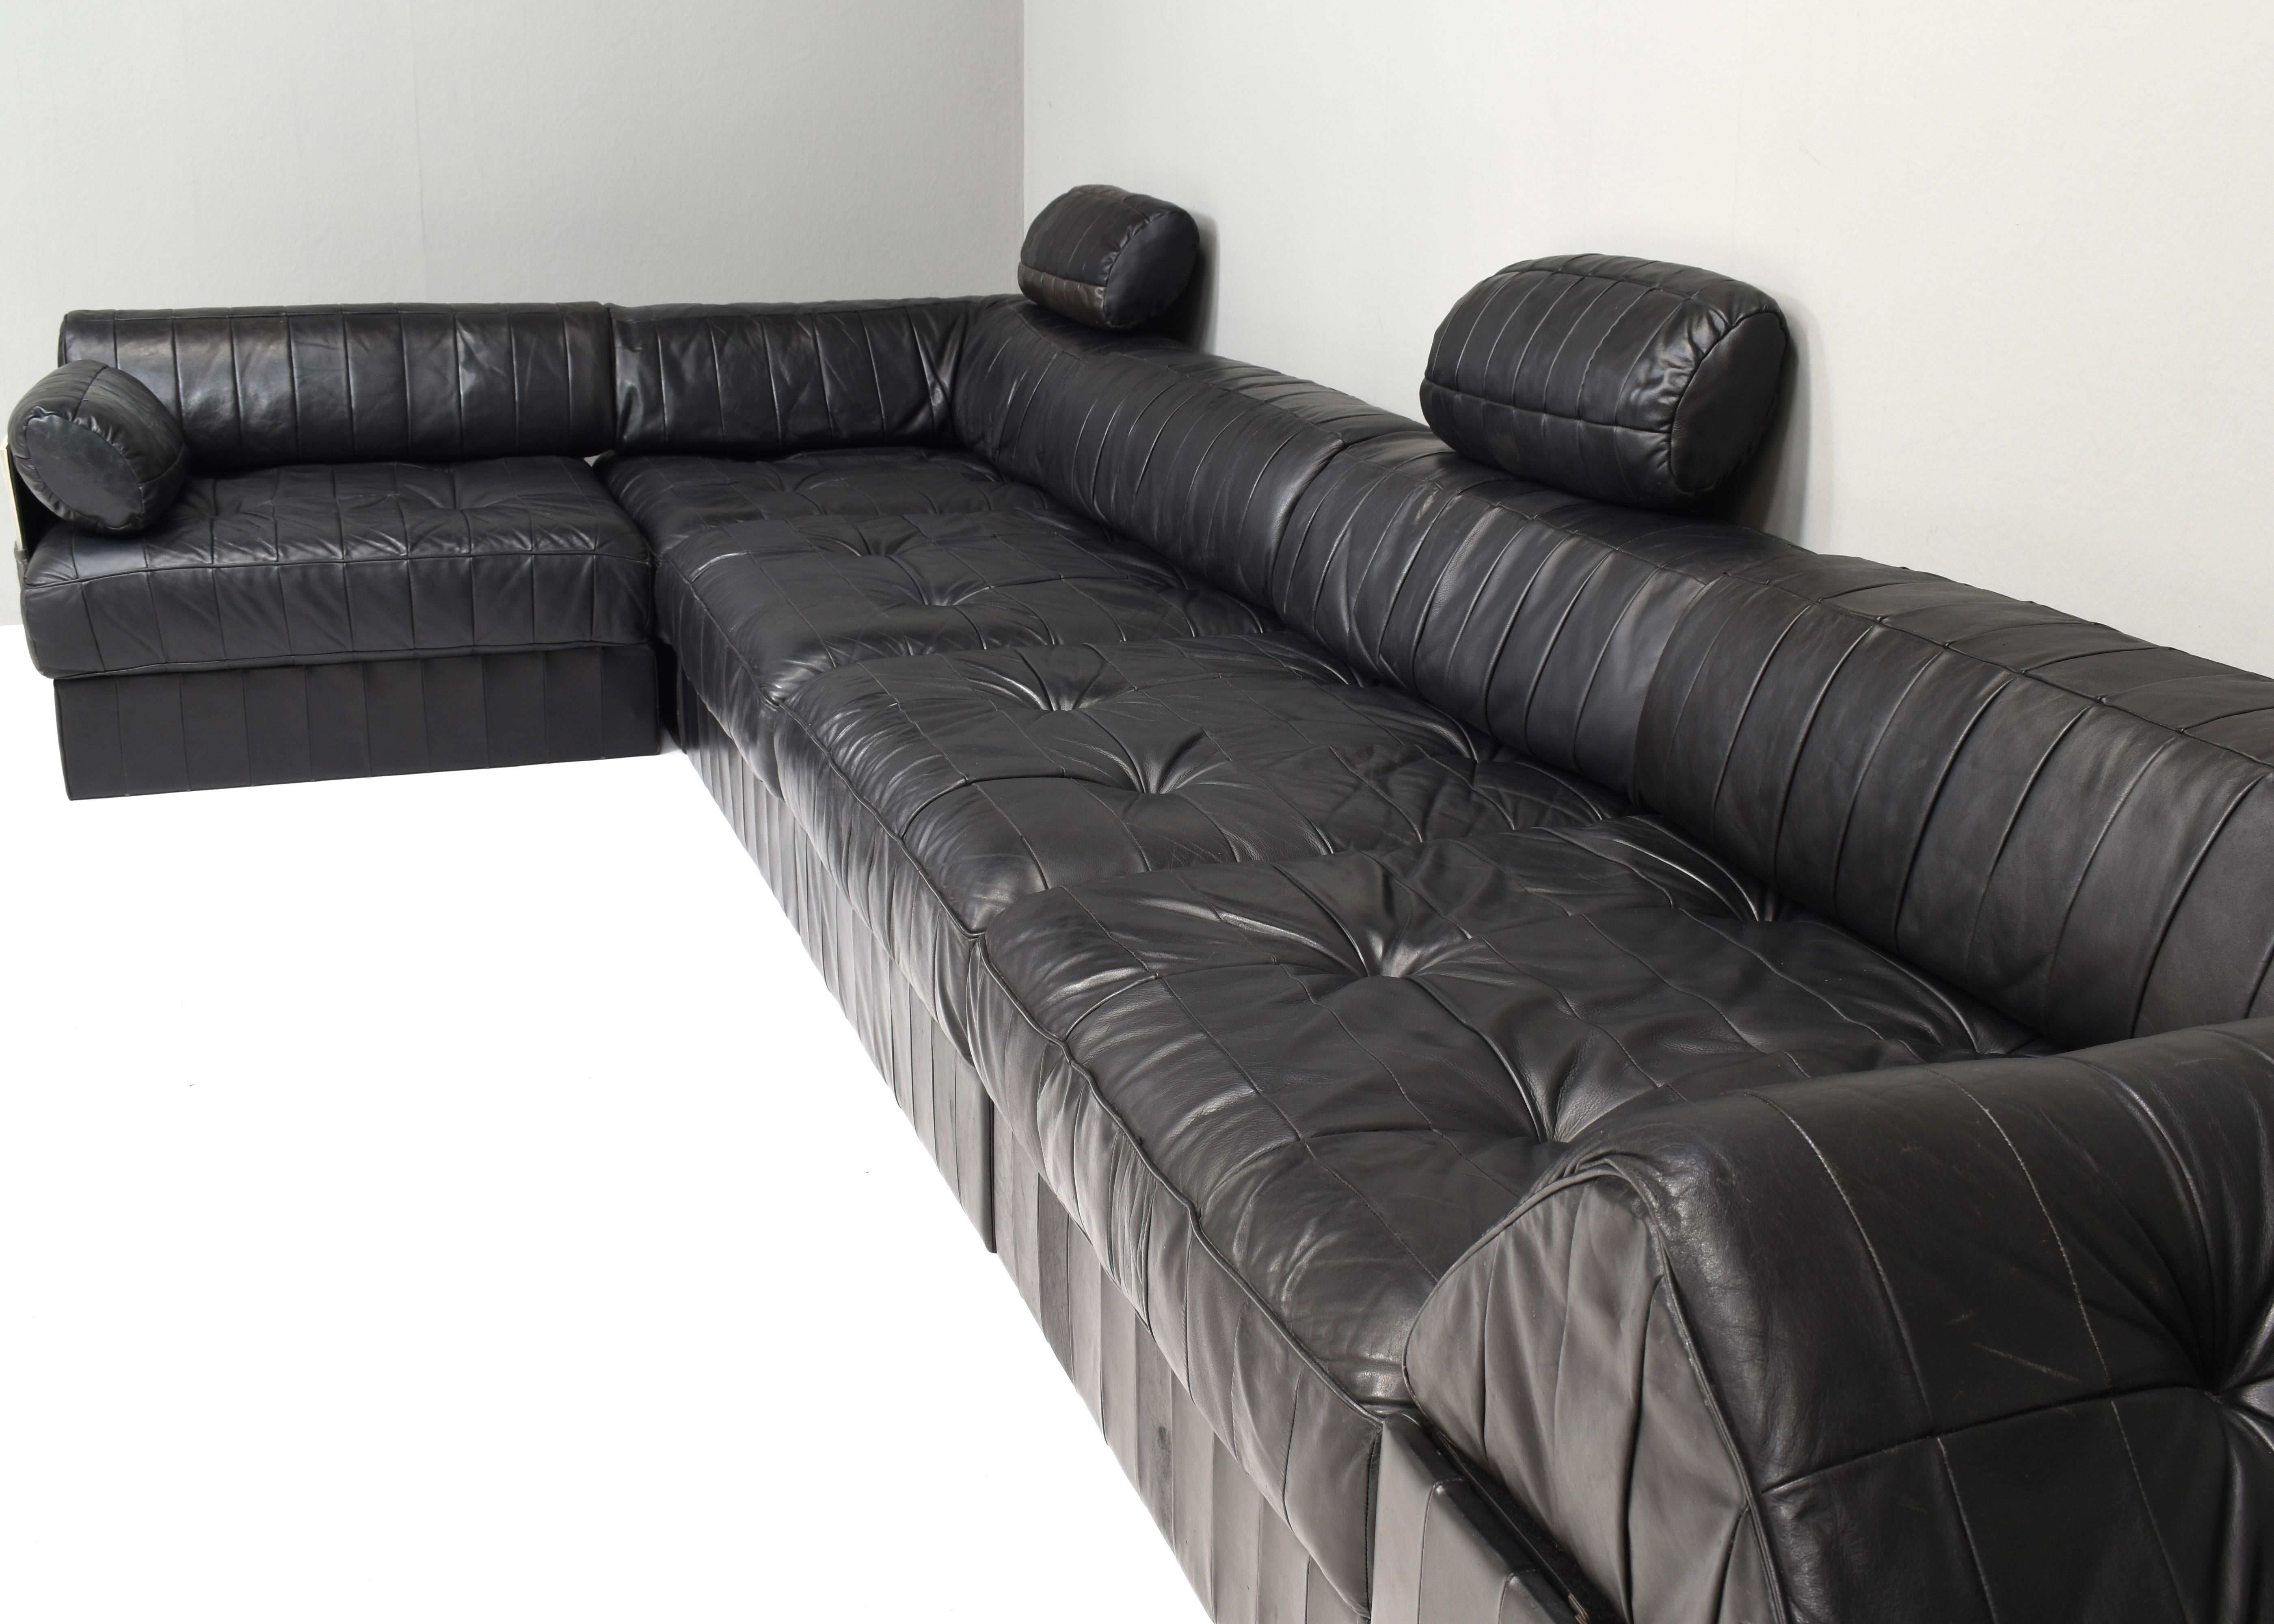 Large De Sede DS-88 Sectional Sofa in Black Leather, Switzerland, 1970's For Sale 5